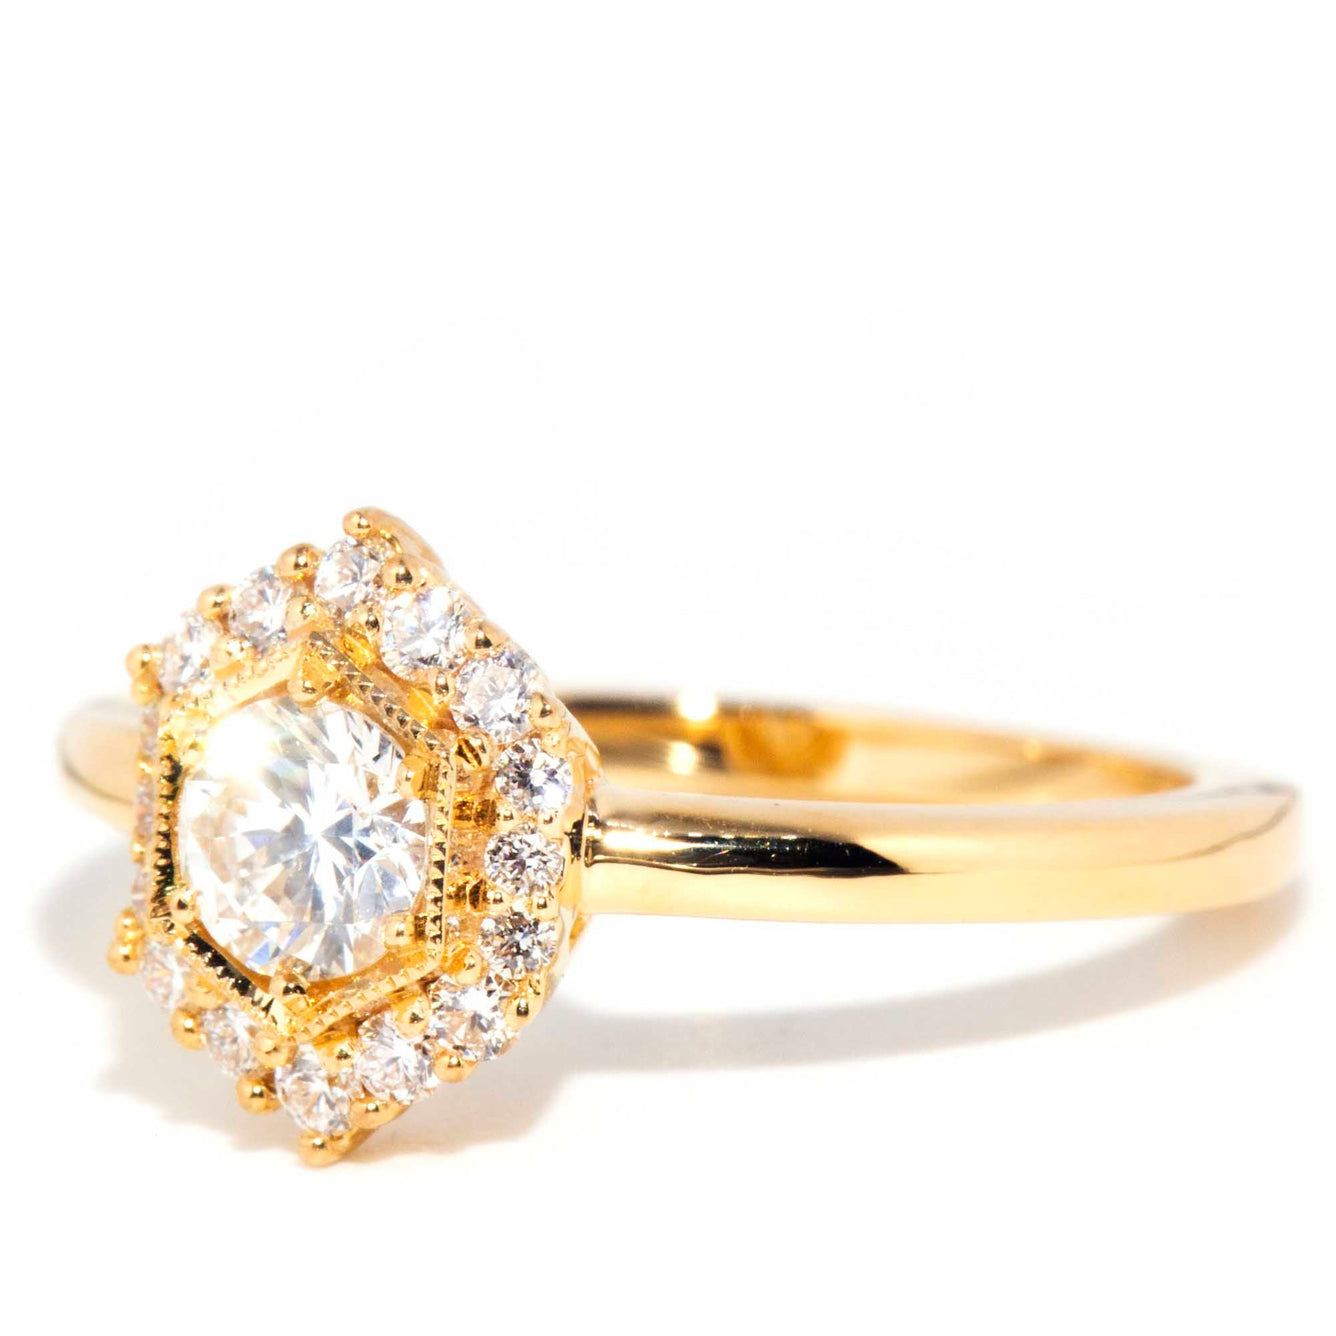 QUINN Contemporary 18ct Yellow Gold Diamond Hexagonal Halo Ring* OB Gemmo Rings Imperial Jewellery 